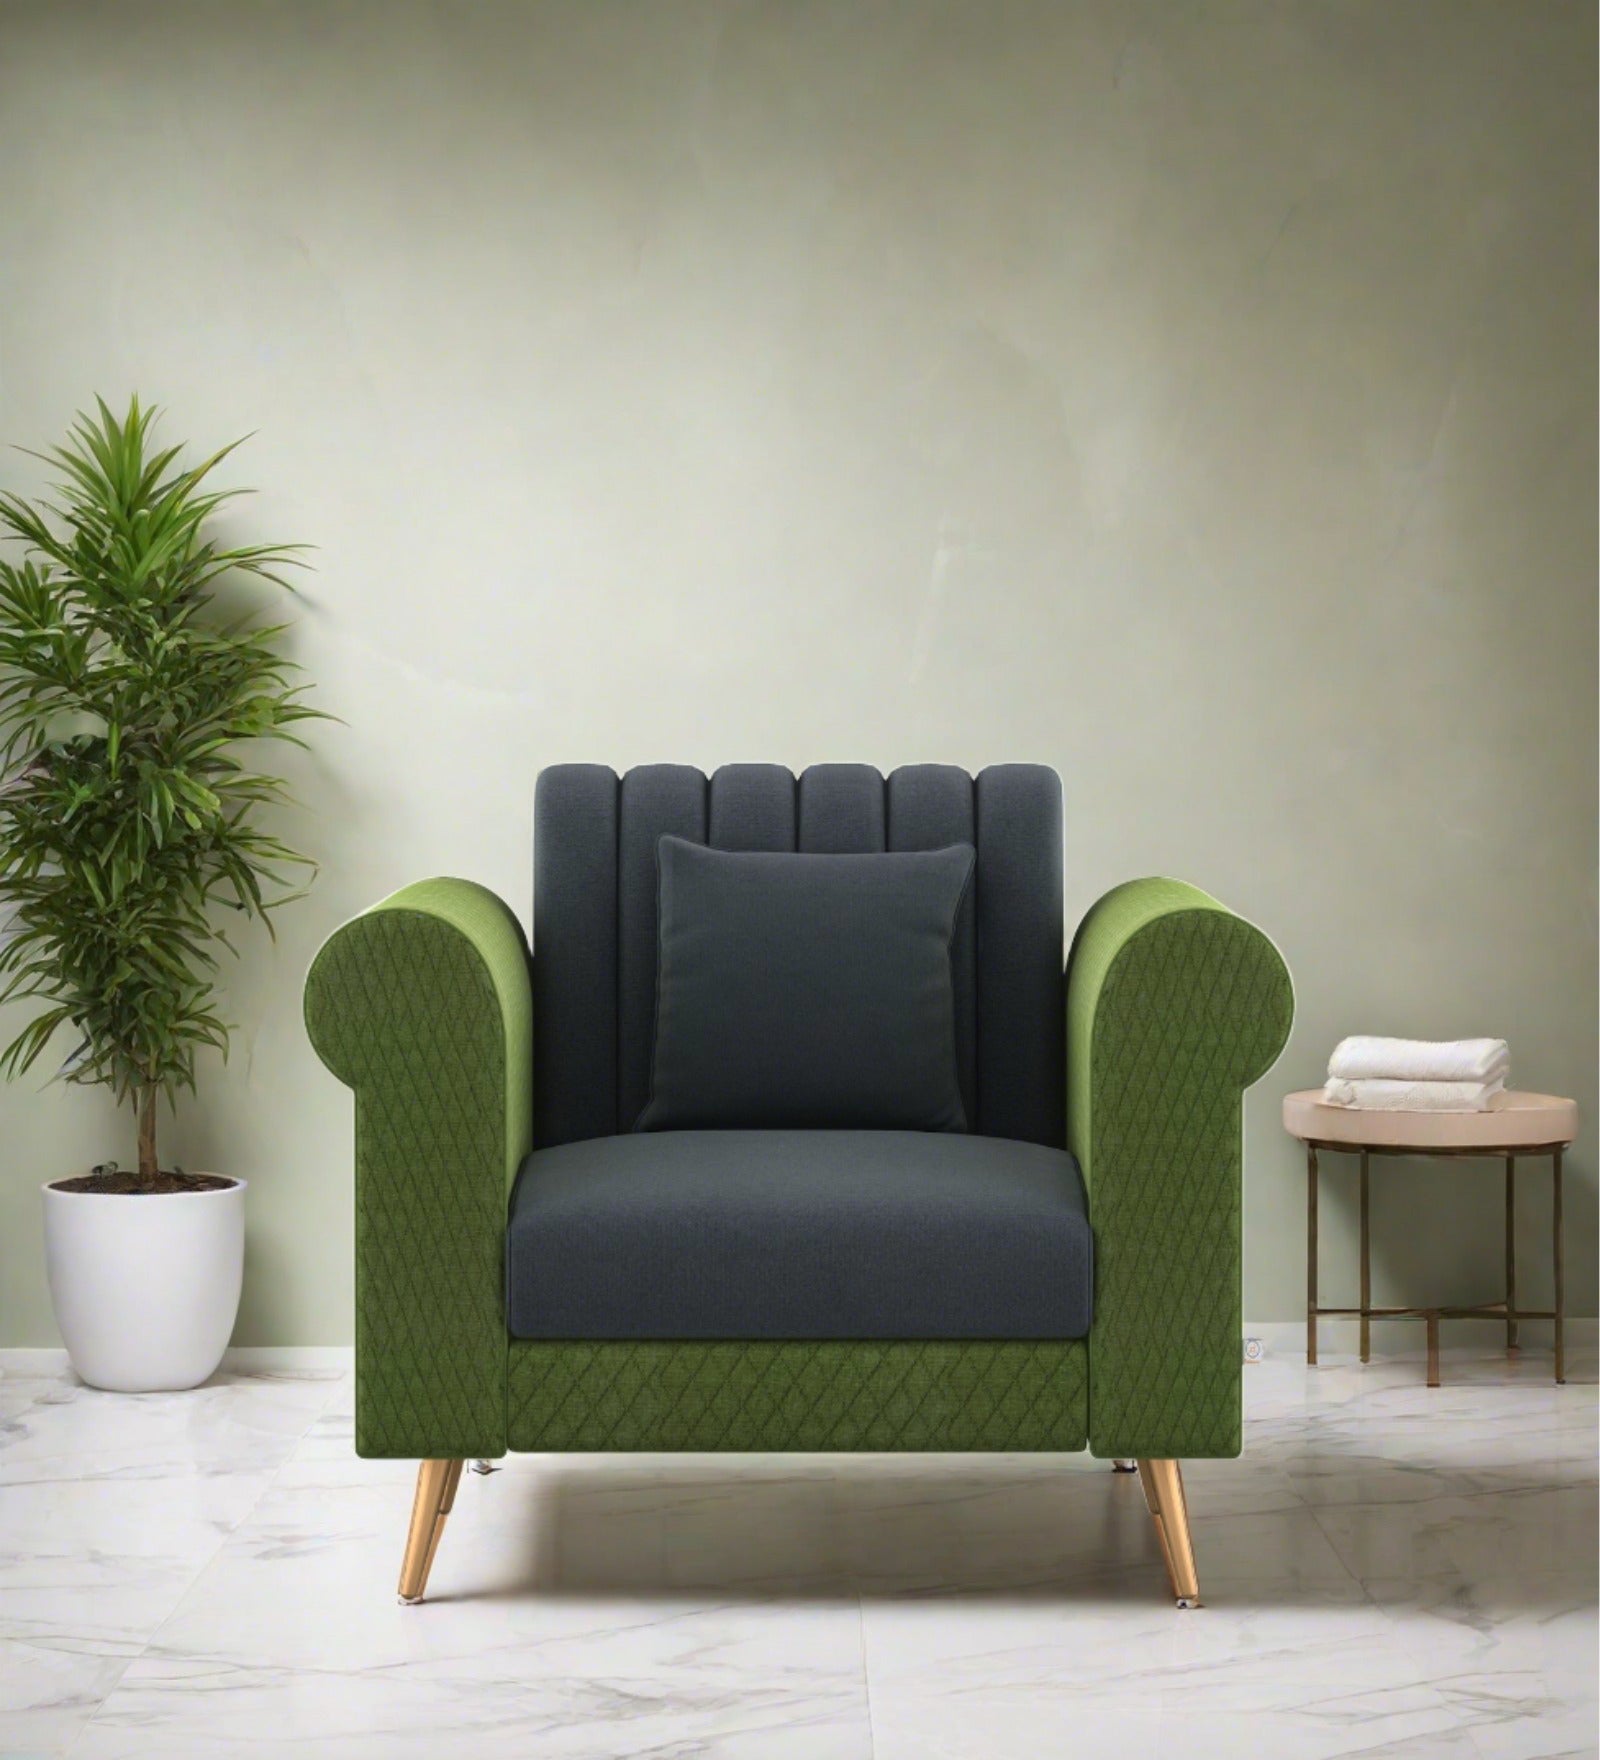 Cori Fabric 1 Seater Sofa In Olive Green and Charcoal Grey Colour